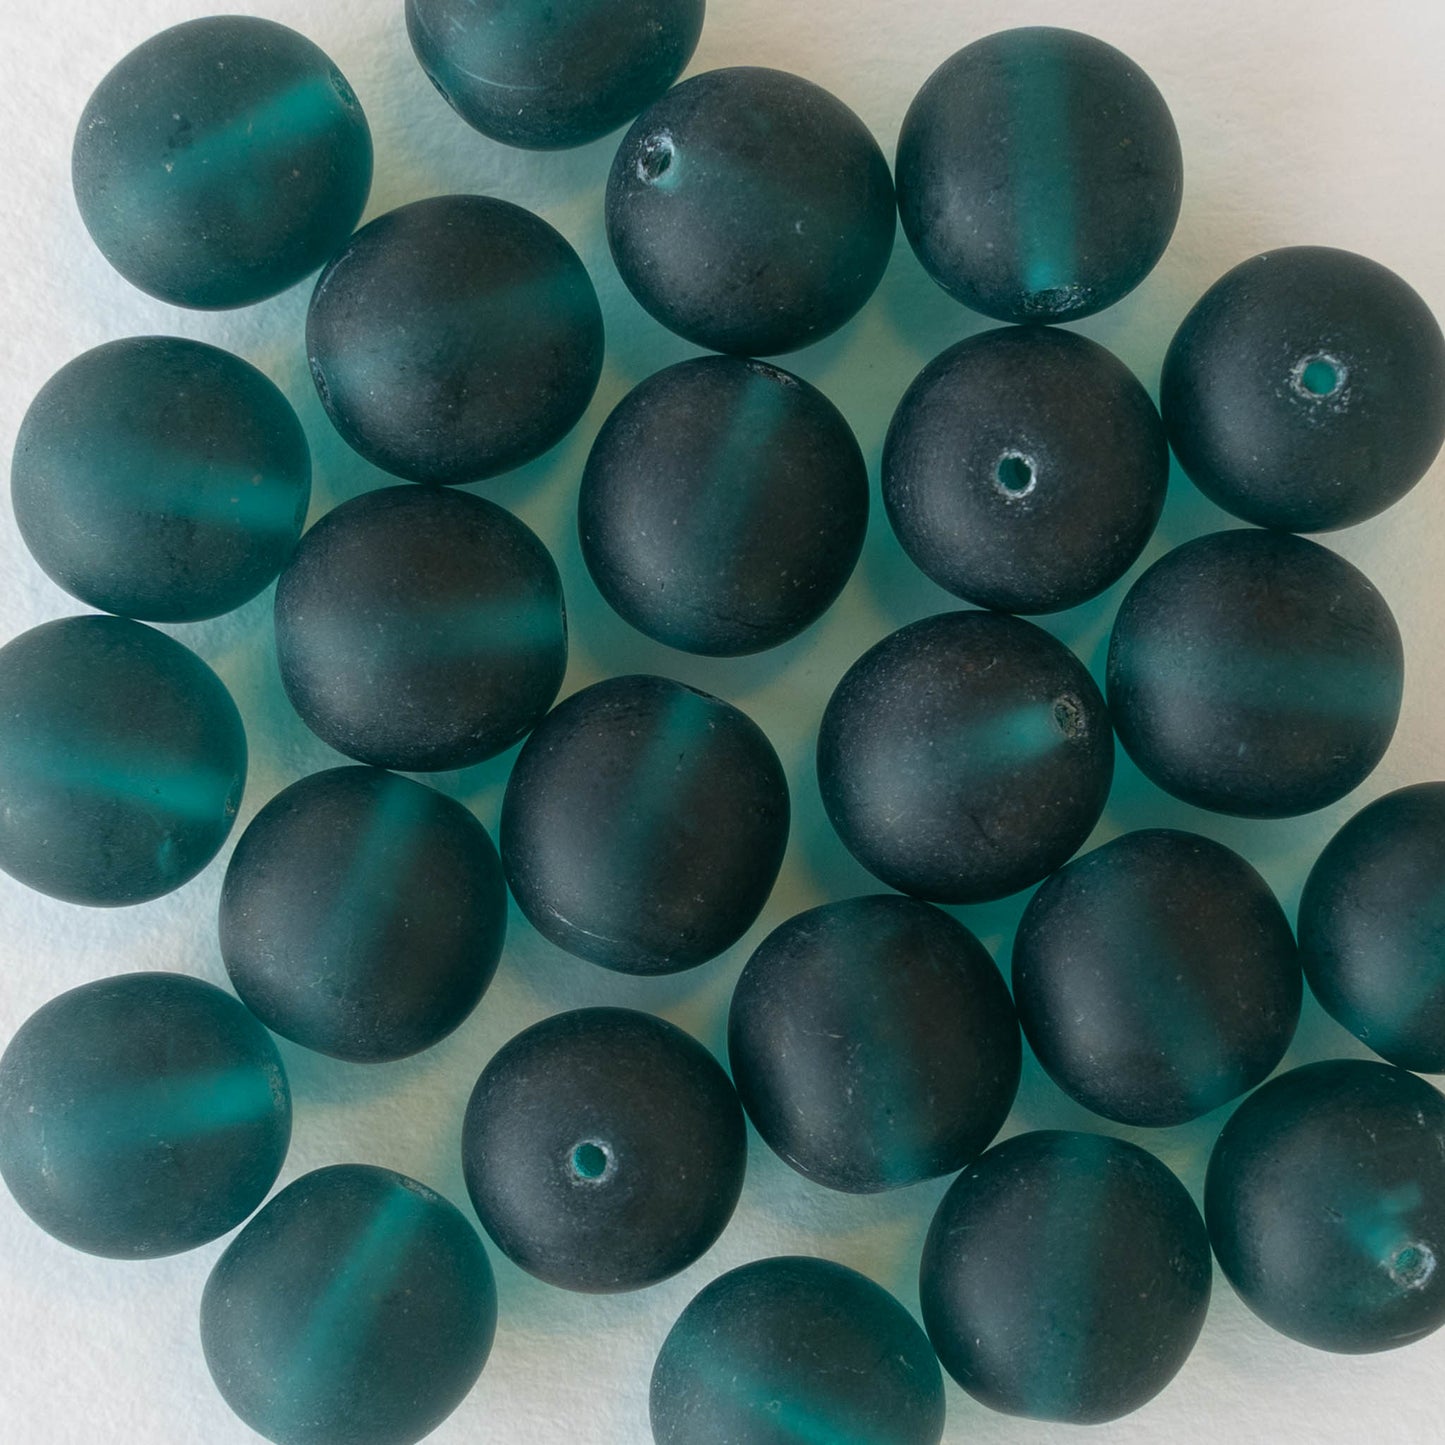 12mm Frosted Glass Round Beads - Dark Teal - 12 Beads